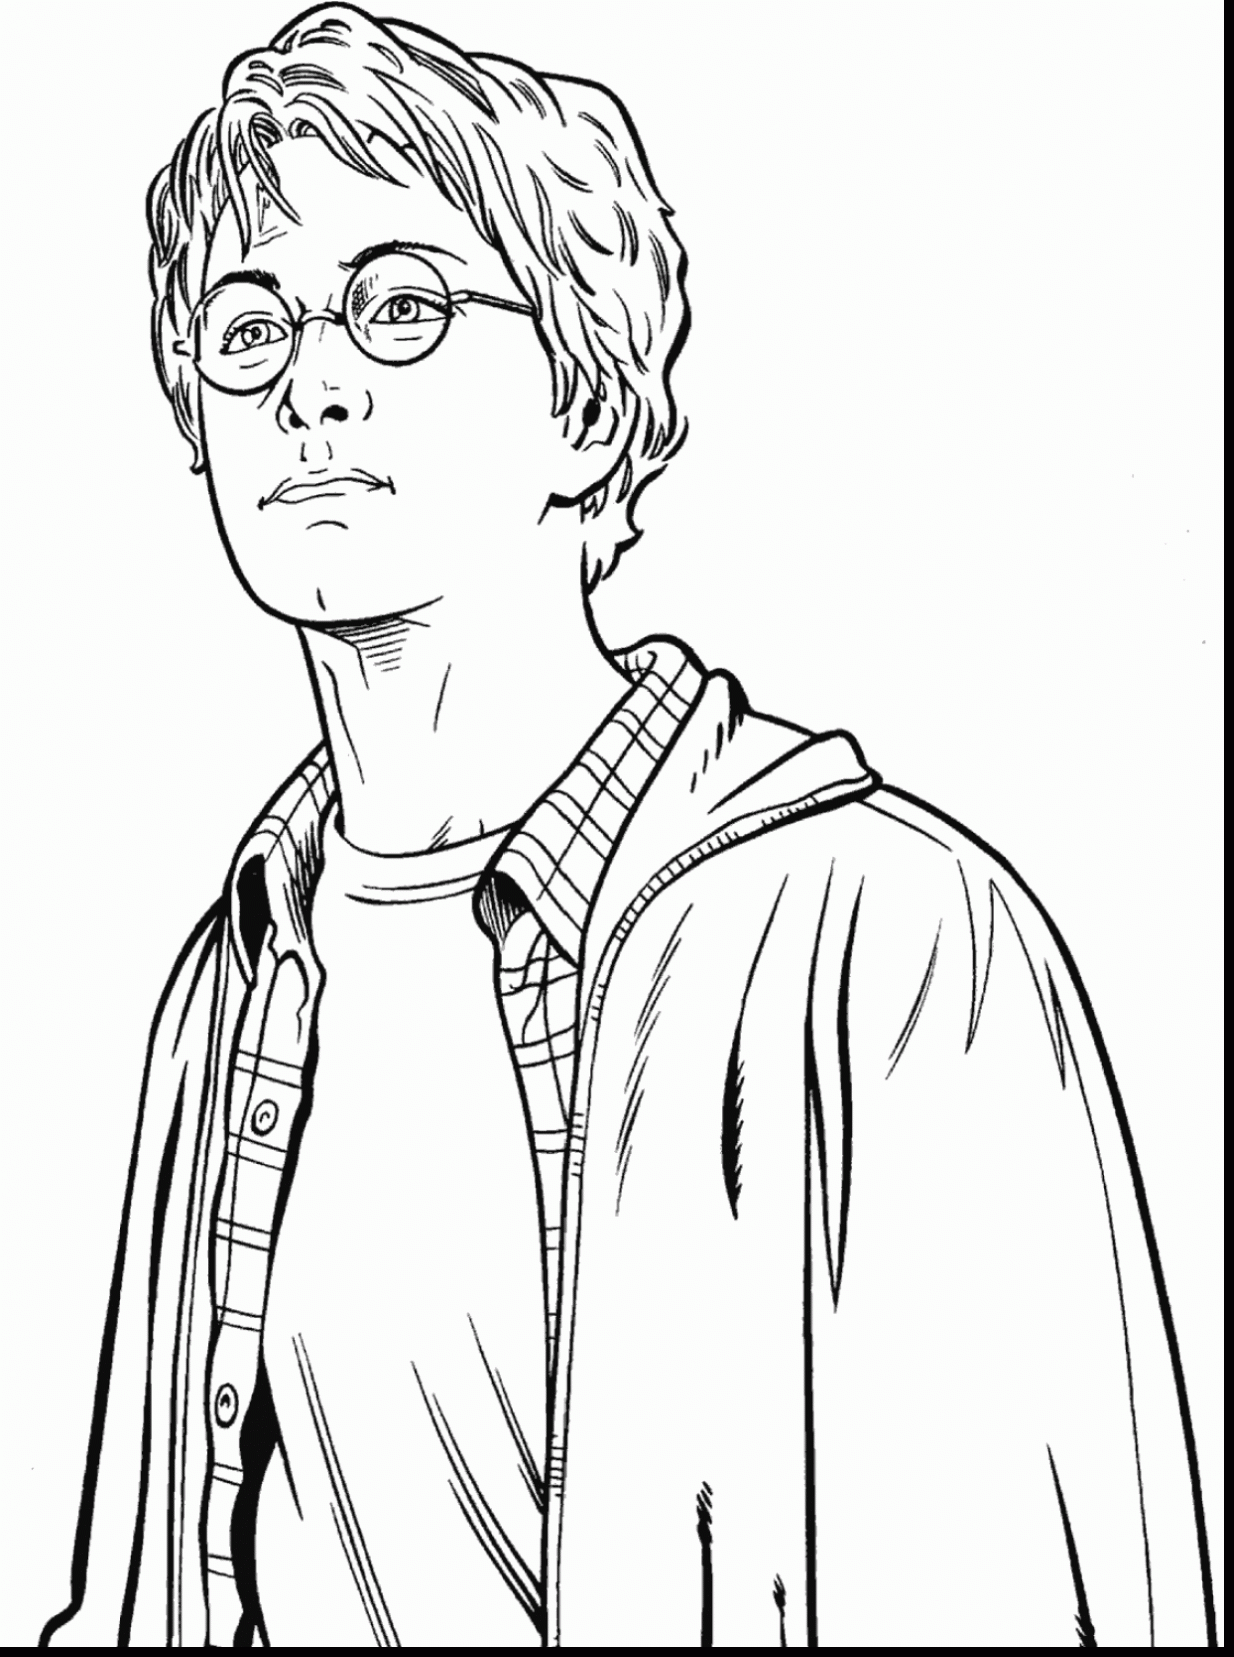 1547514987 All Posts Tagged Harry Potter Coloring Pages Hermione Harry Potter Coloring Pages Hermio On Harry Potter Coloring Page Resour 